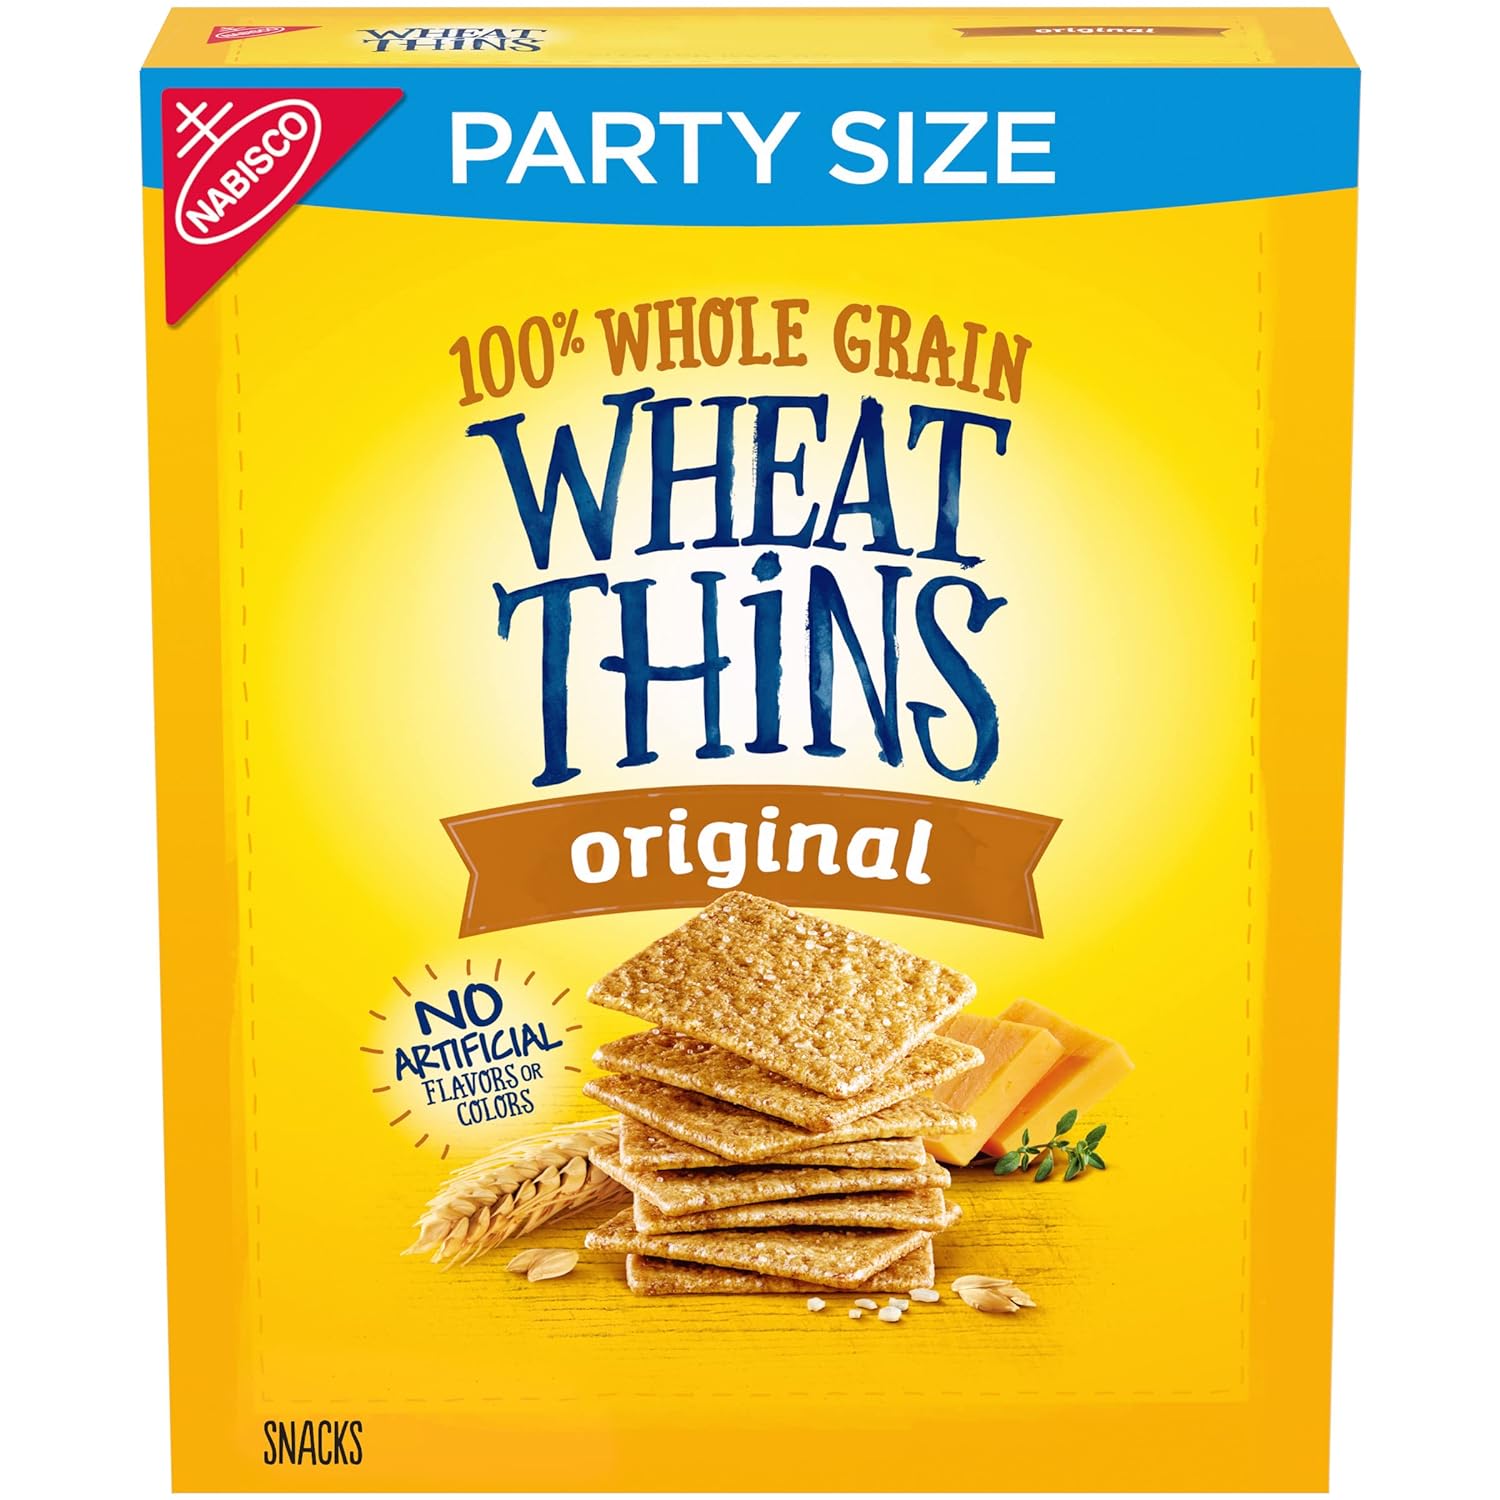 20-Ounce Wheat Thins Original Wheat Crackers (Party Size) $3.40 w/ Subscribe & Save + Free S&H w/ Prime